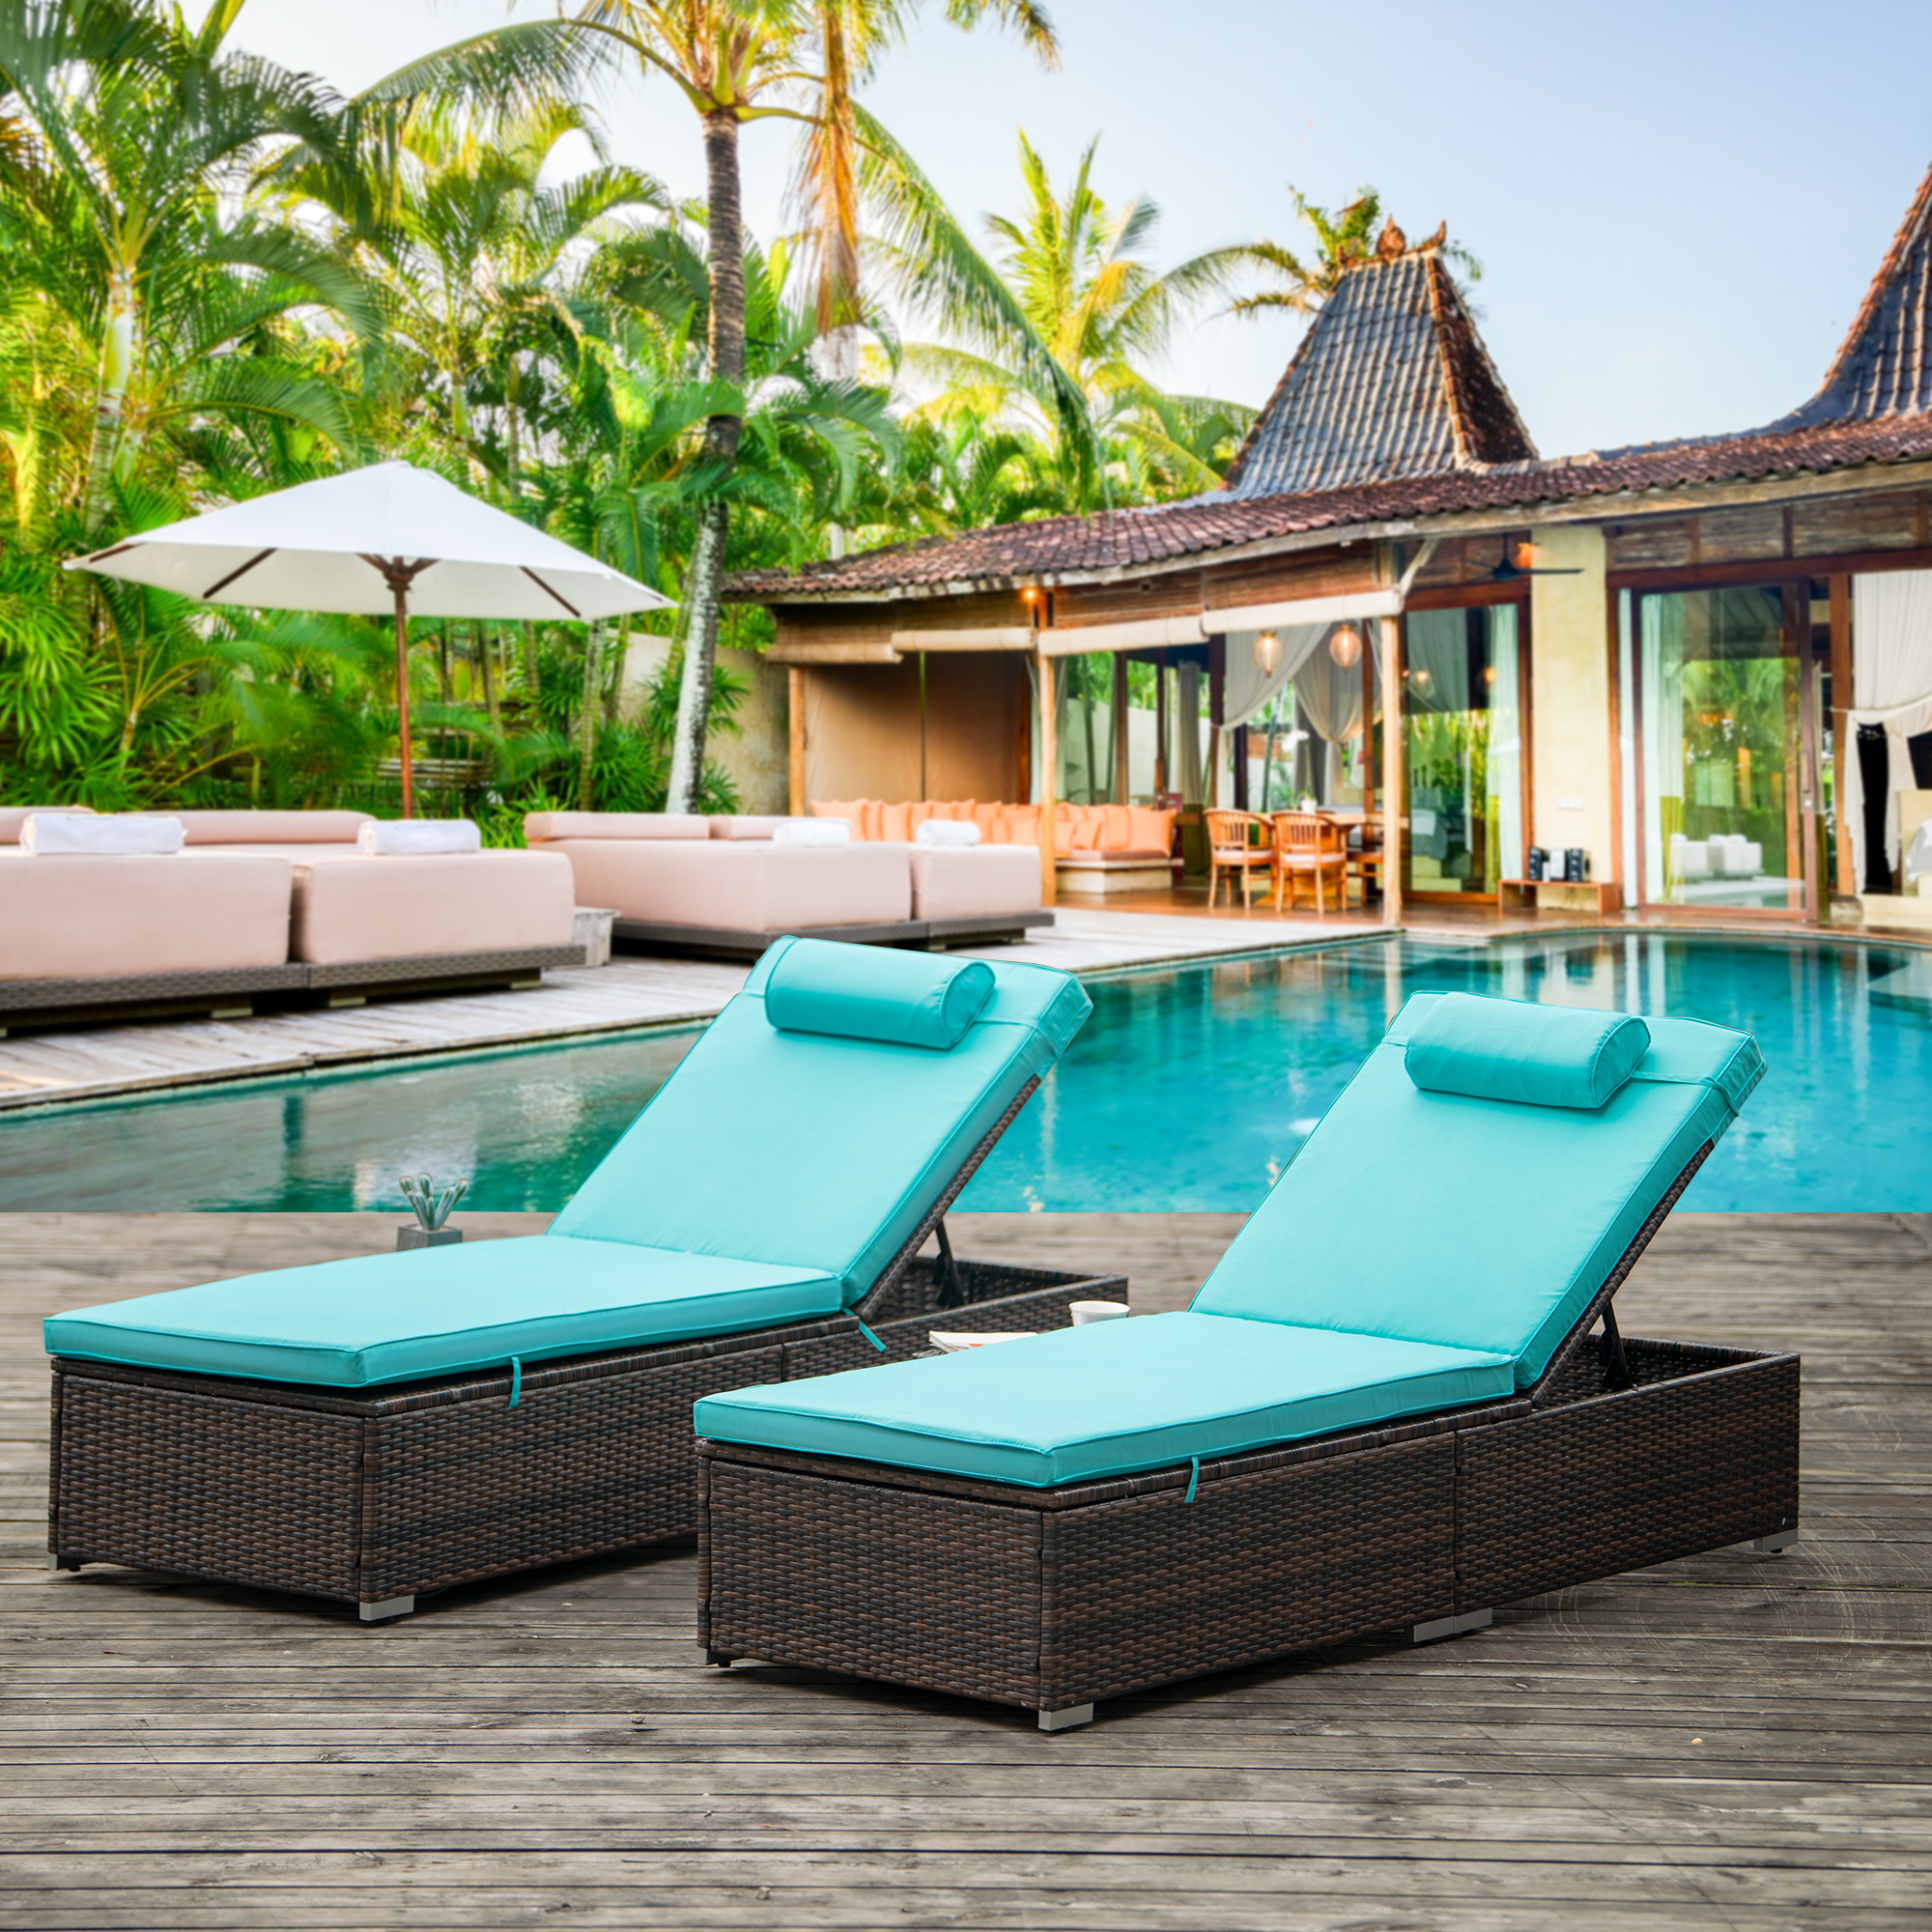 2 Pieces Patio Chaise Lounge Chair Set, PE Rattan Chaise Lounge with Side Table, Sun Chaise Lounge Furniture, Pool Furniture Sunbed with Cushion, Tanning Lounge Chair with 5 Adjustable Positions, B381 - image 2 of 8